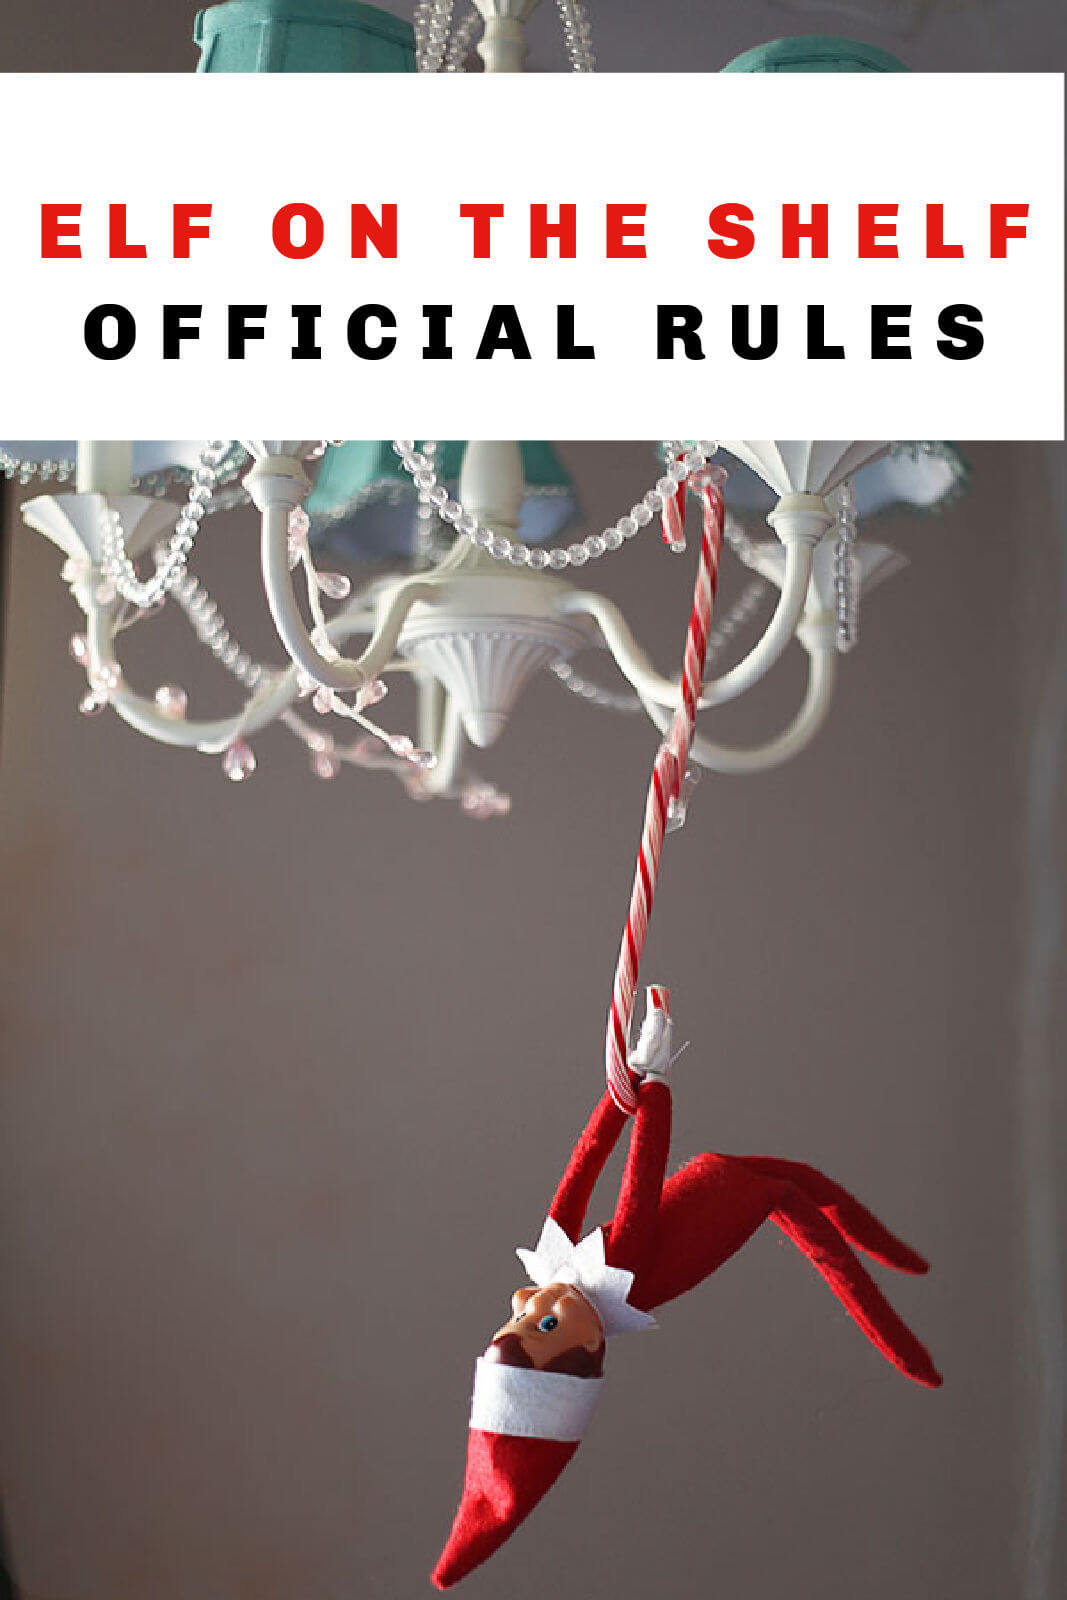 An elf on the shelf hangs from a candy cane on a chandelier. Text overlay reads "ELF ON THE SHELF OFFICIAL RULES"